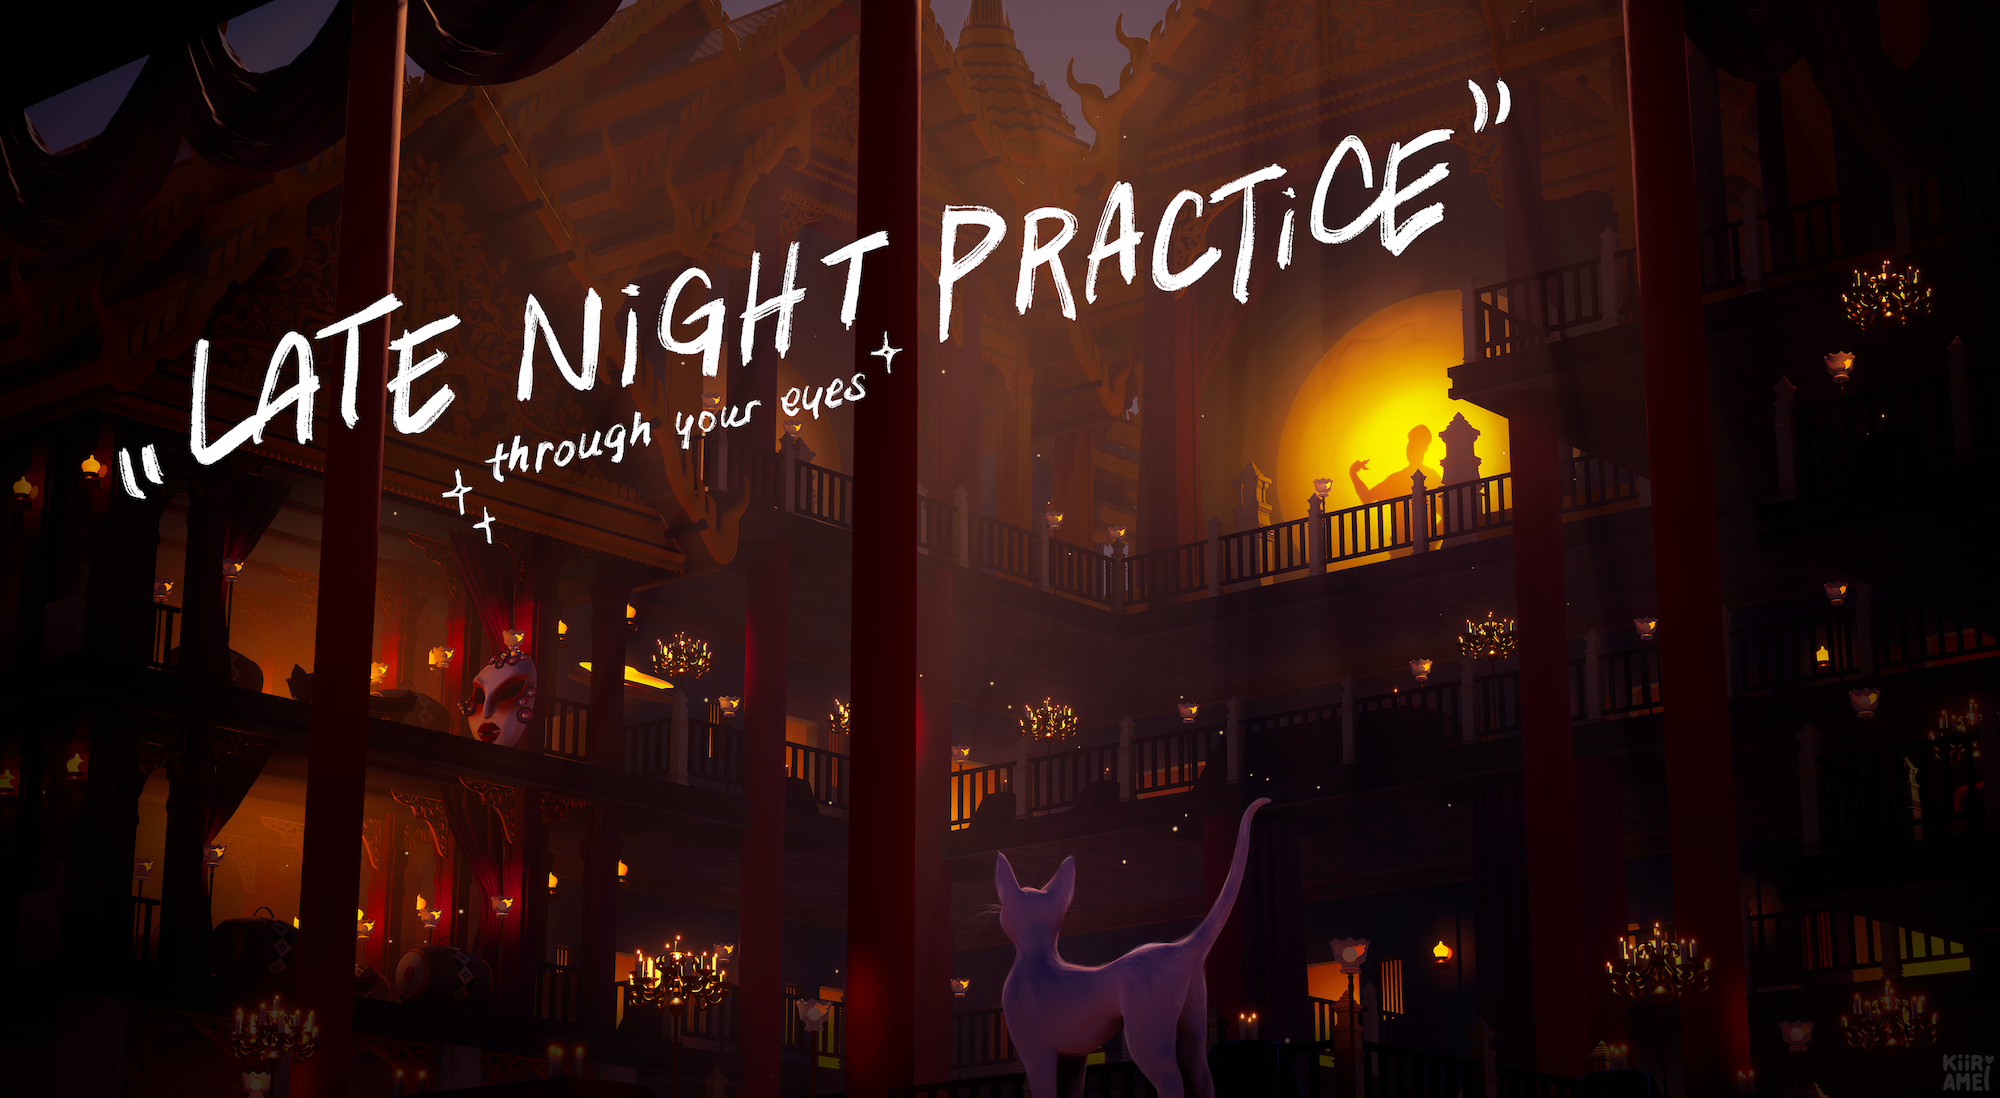 Late Night Practice - through your eyes